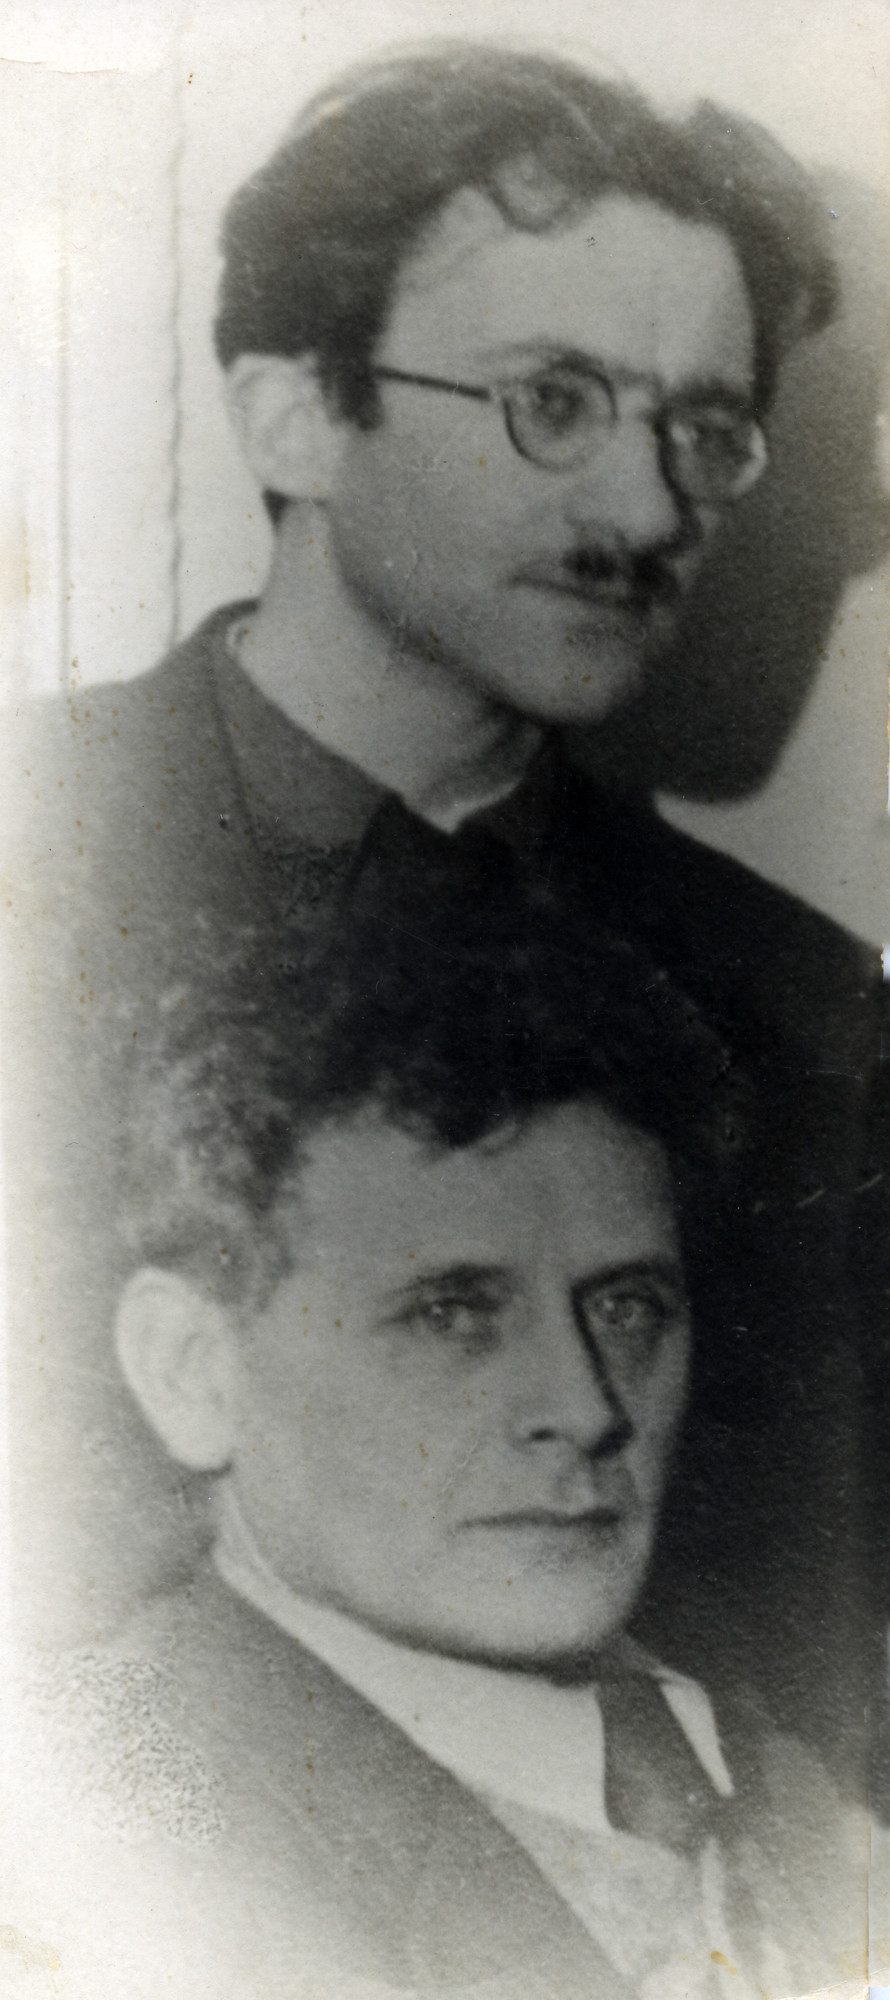 Avraham Sutzkever with Russian Jewish poet and playwright Peretz Markish.